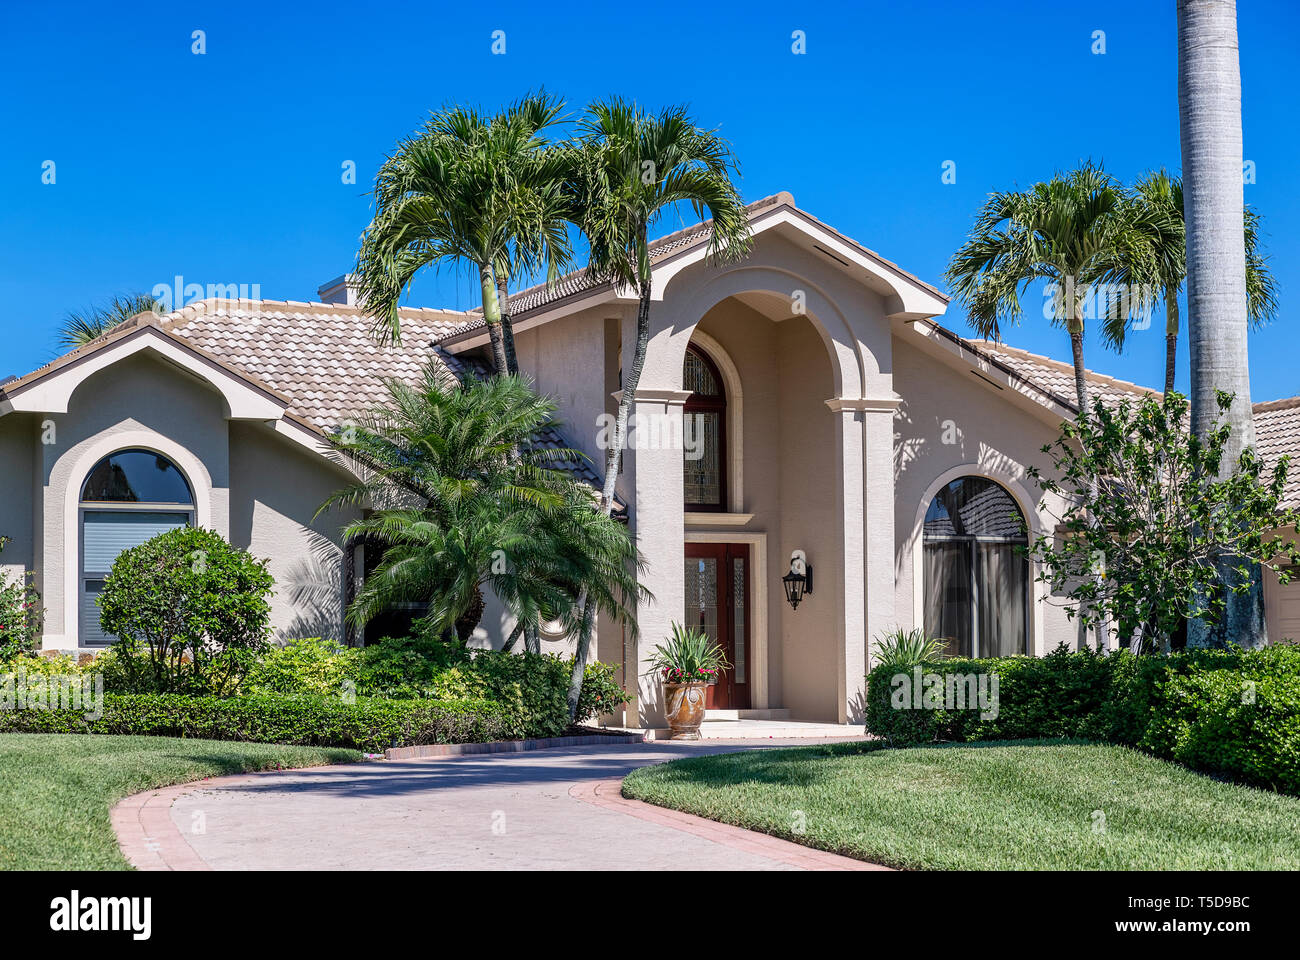 Typical home in one of the many  gated communities within the Naples area, Florida, USA. Stock Photo